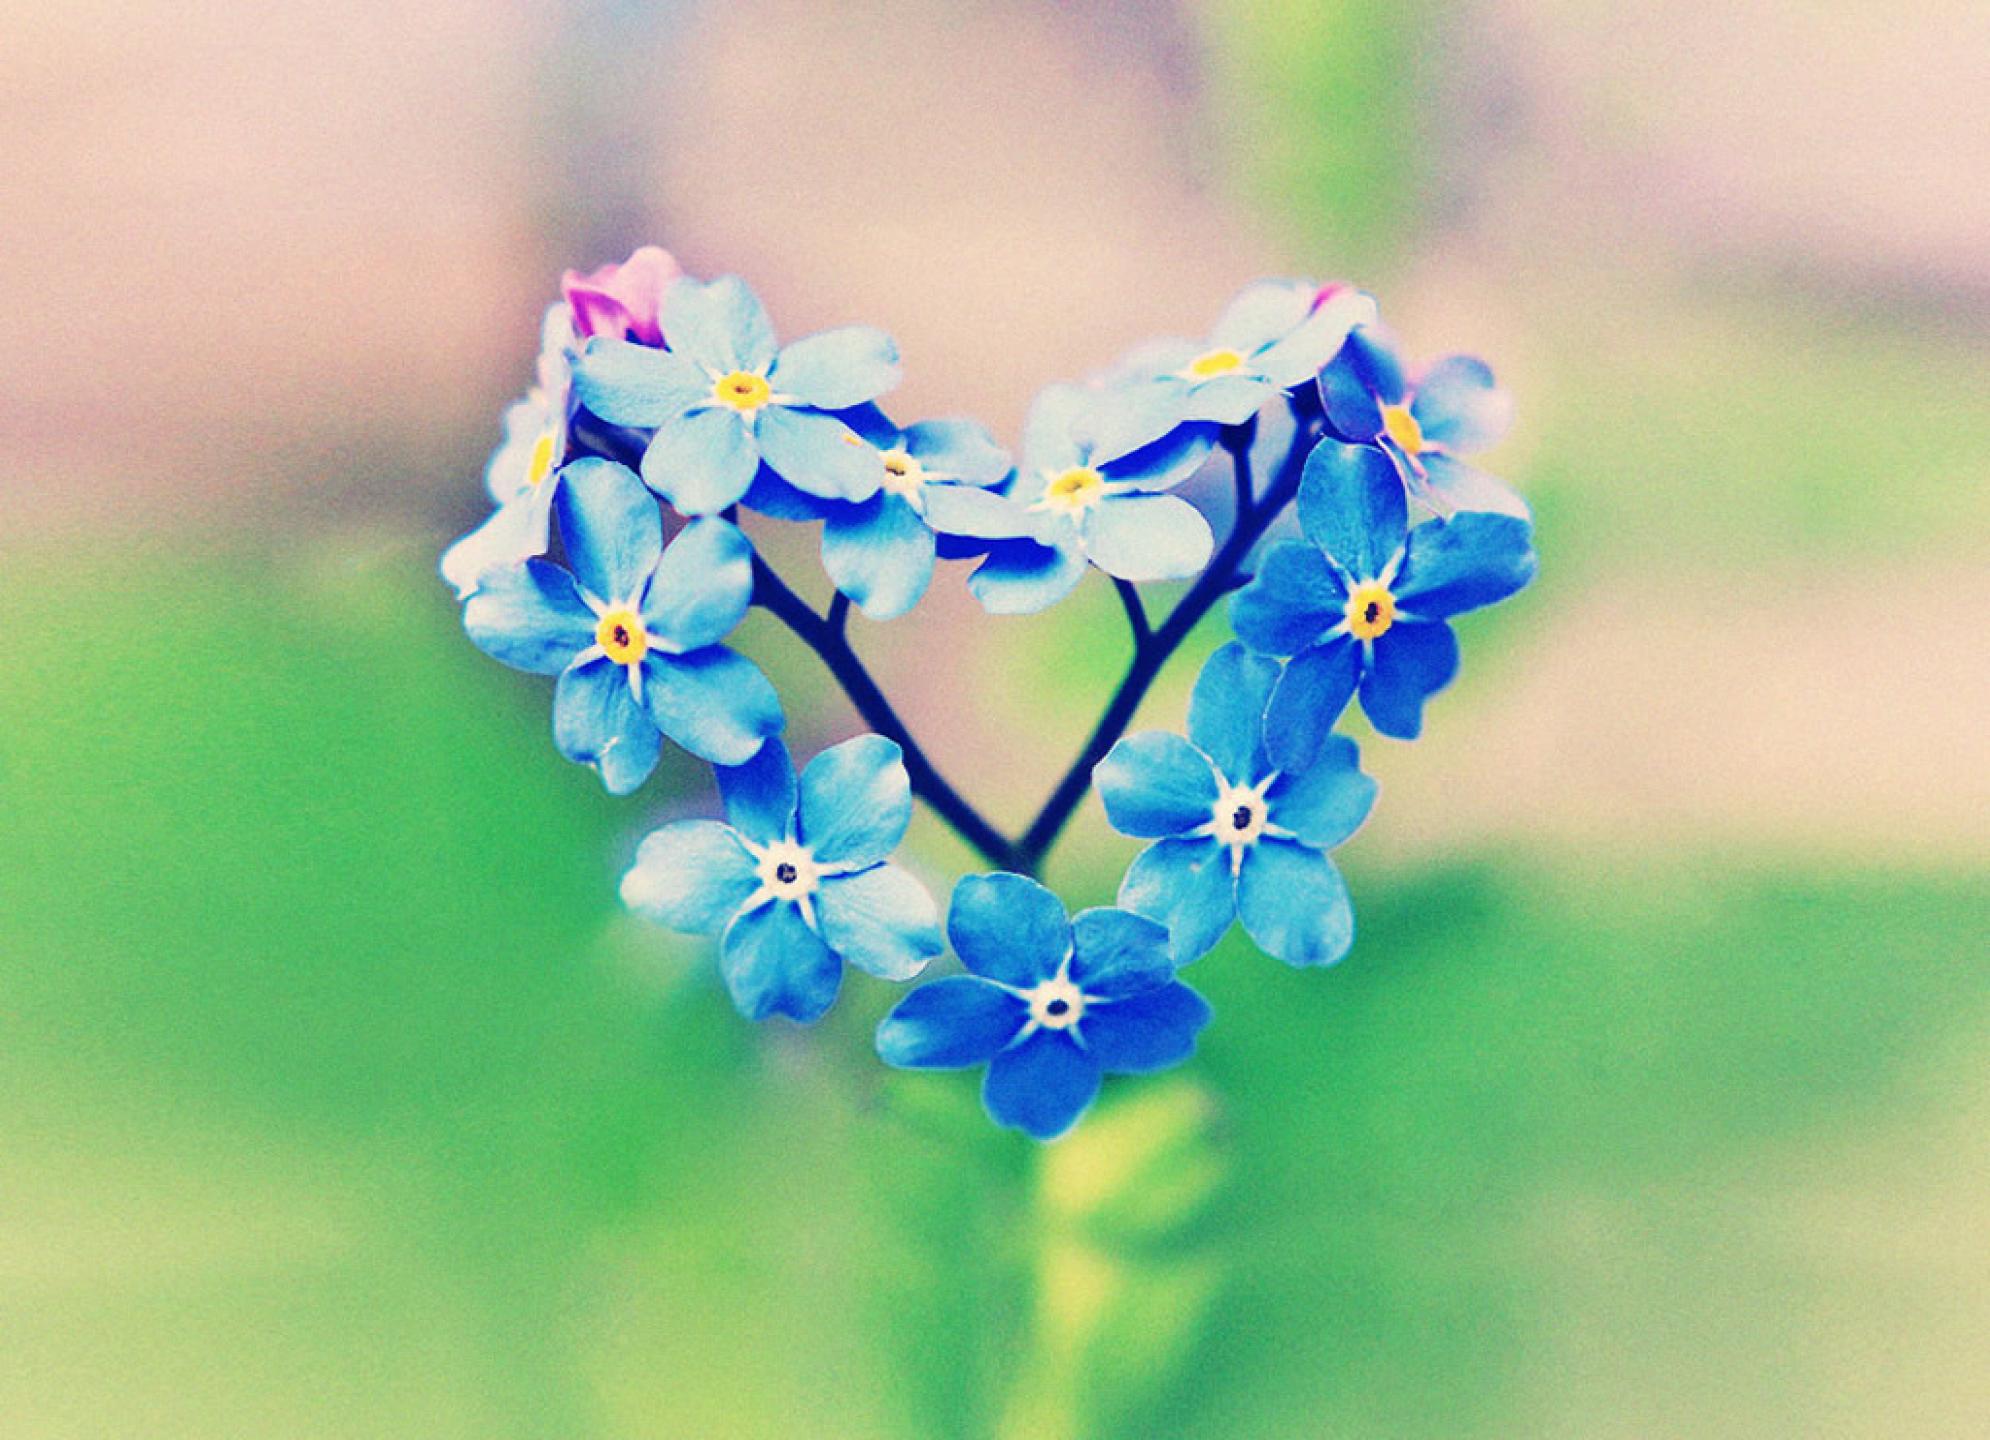 Heart, Blue, And Flower Image - Forget Me Not Heart - HD Wallpaper 